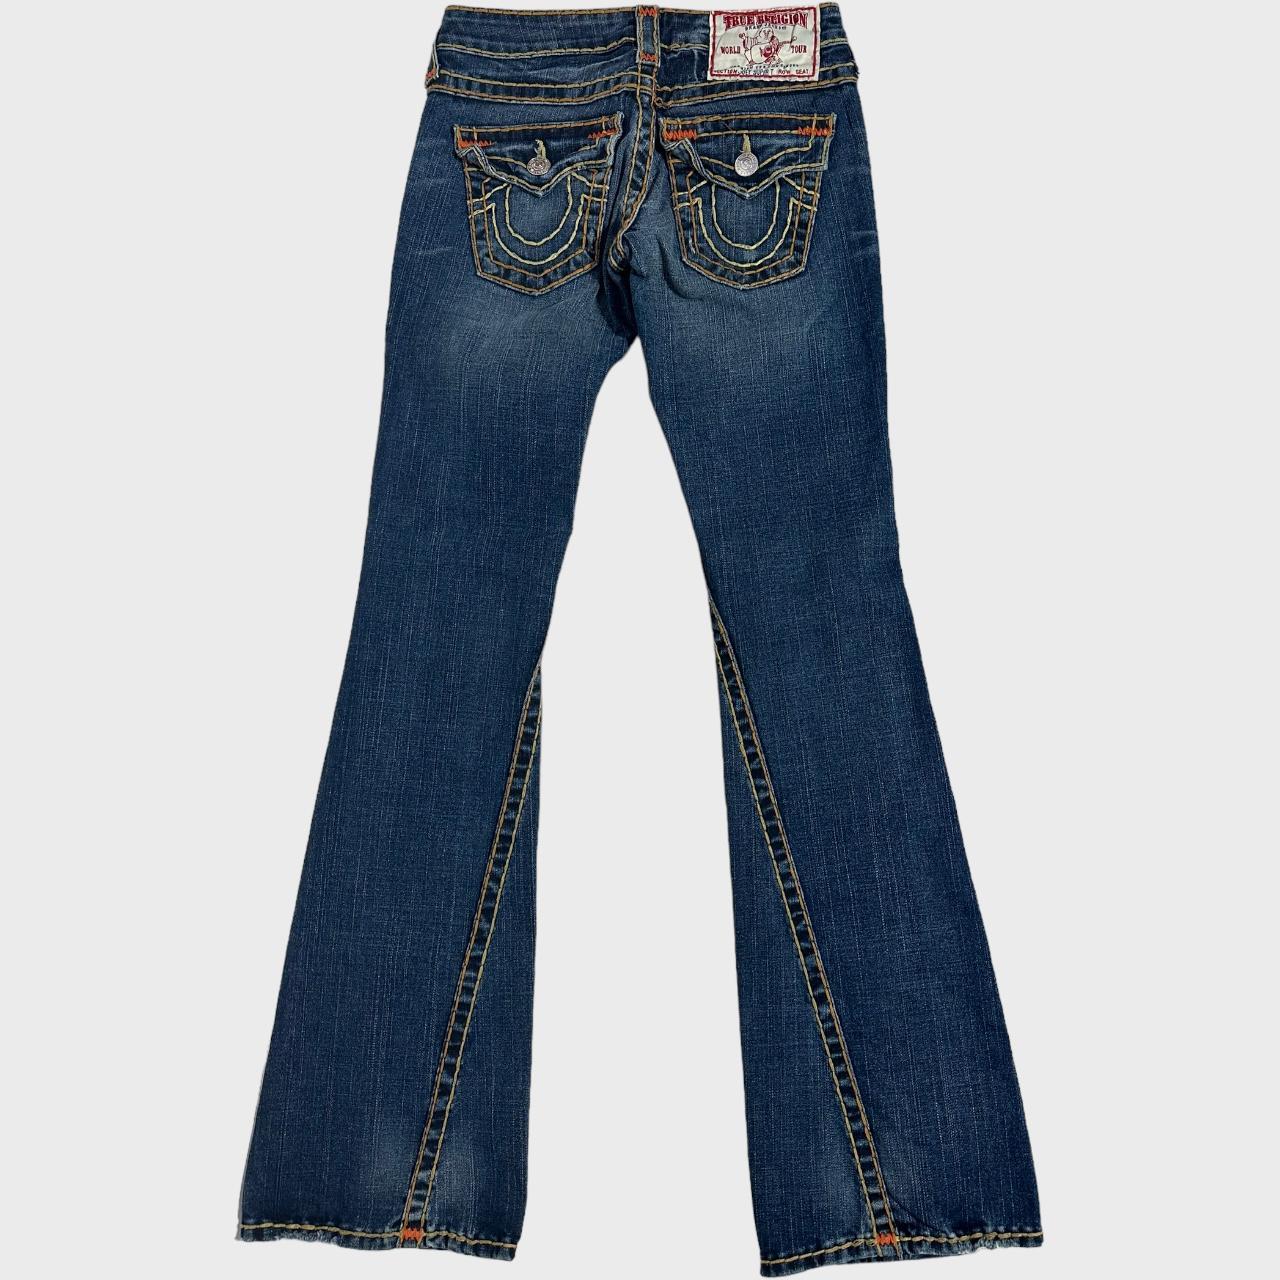 Vintage distressed PETITE true religion y2k low waisted dark wash bootcut Joey Super T flared jeans